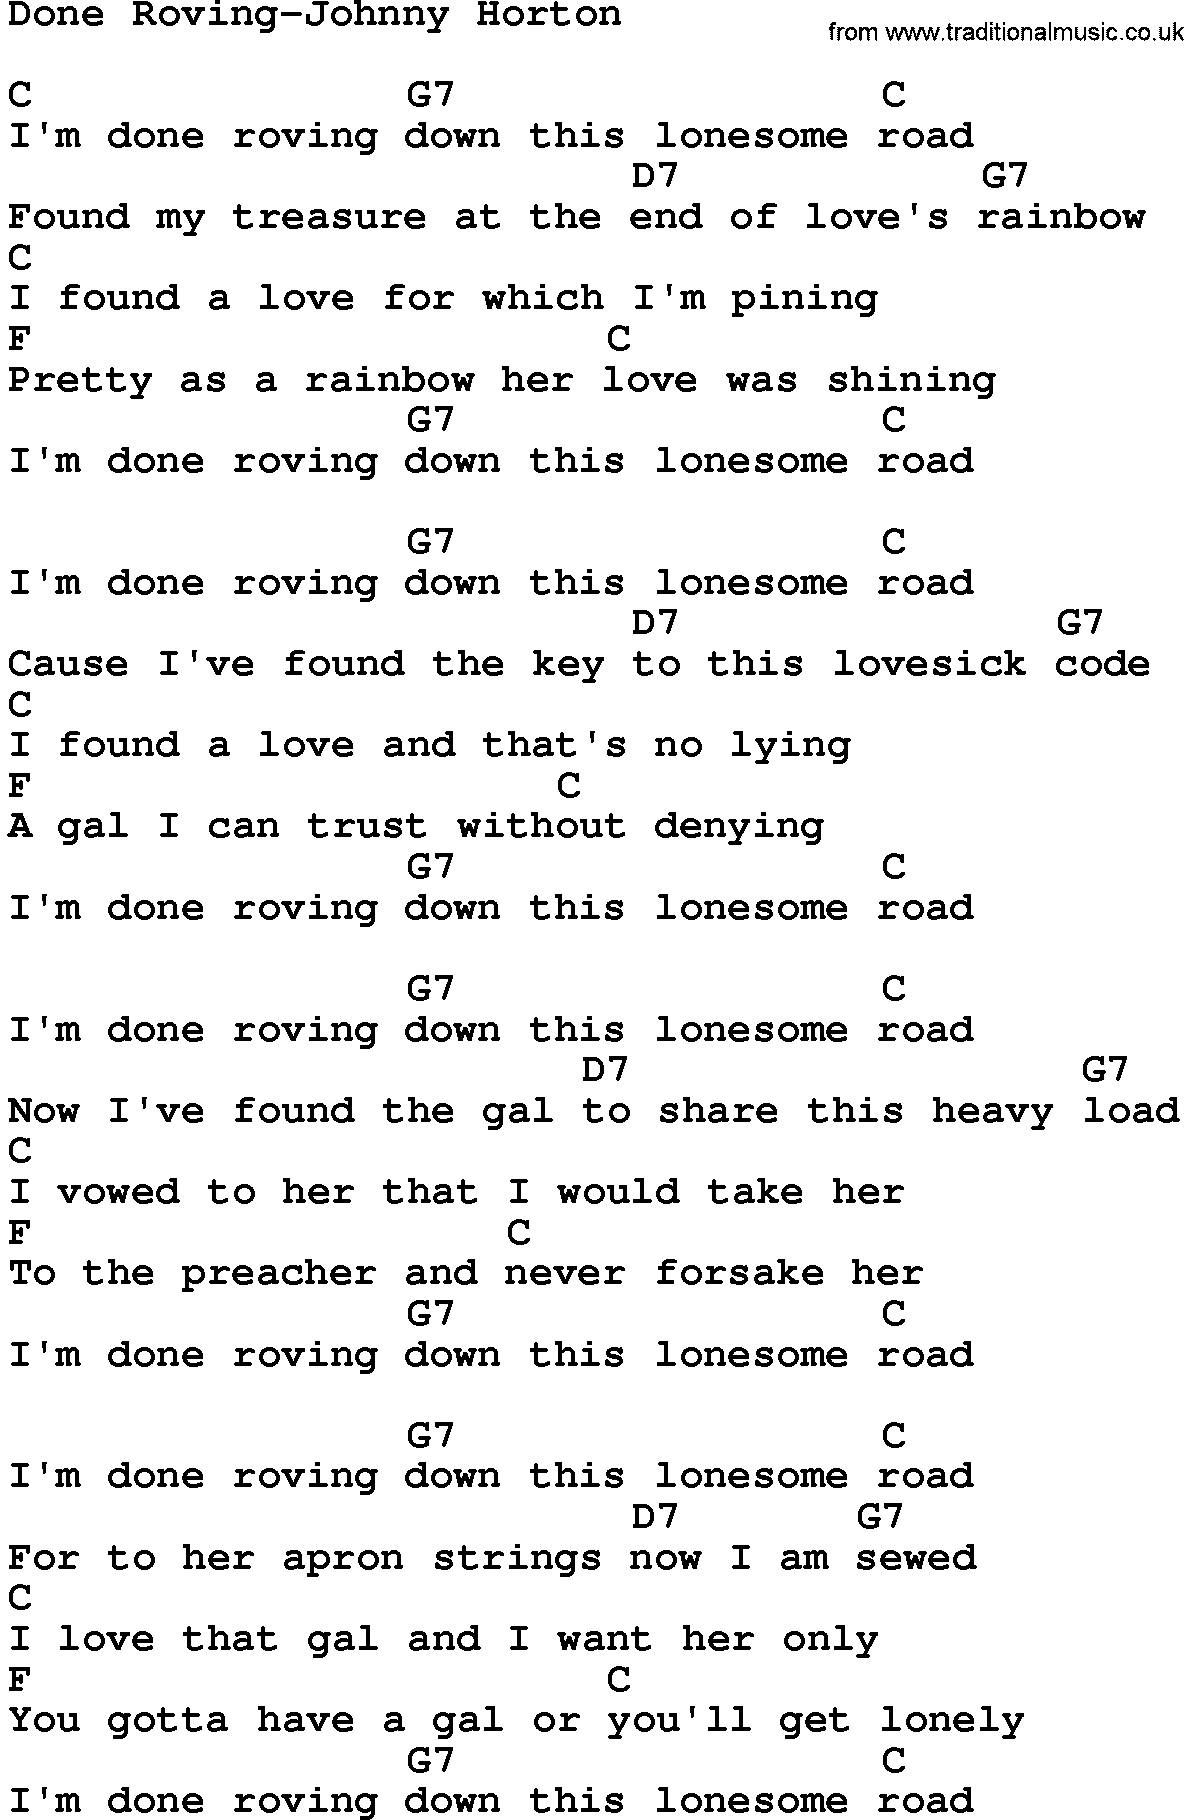 Country music song: Done Roving-Johnny Horton lyrics and chords